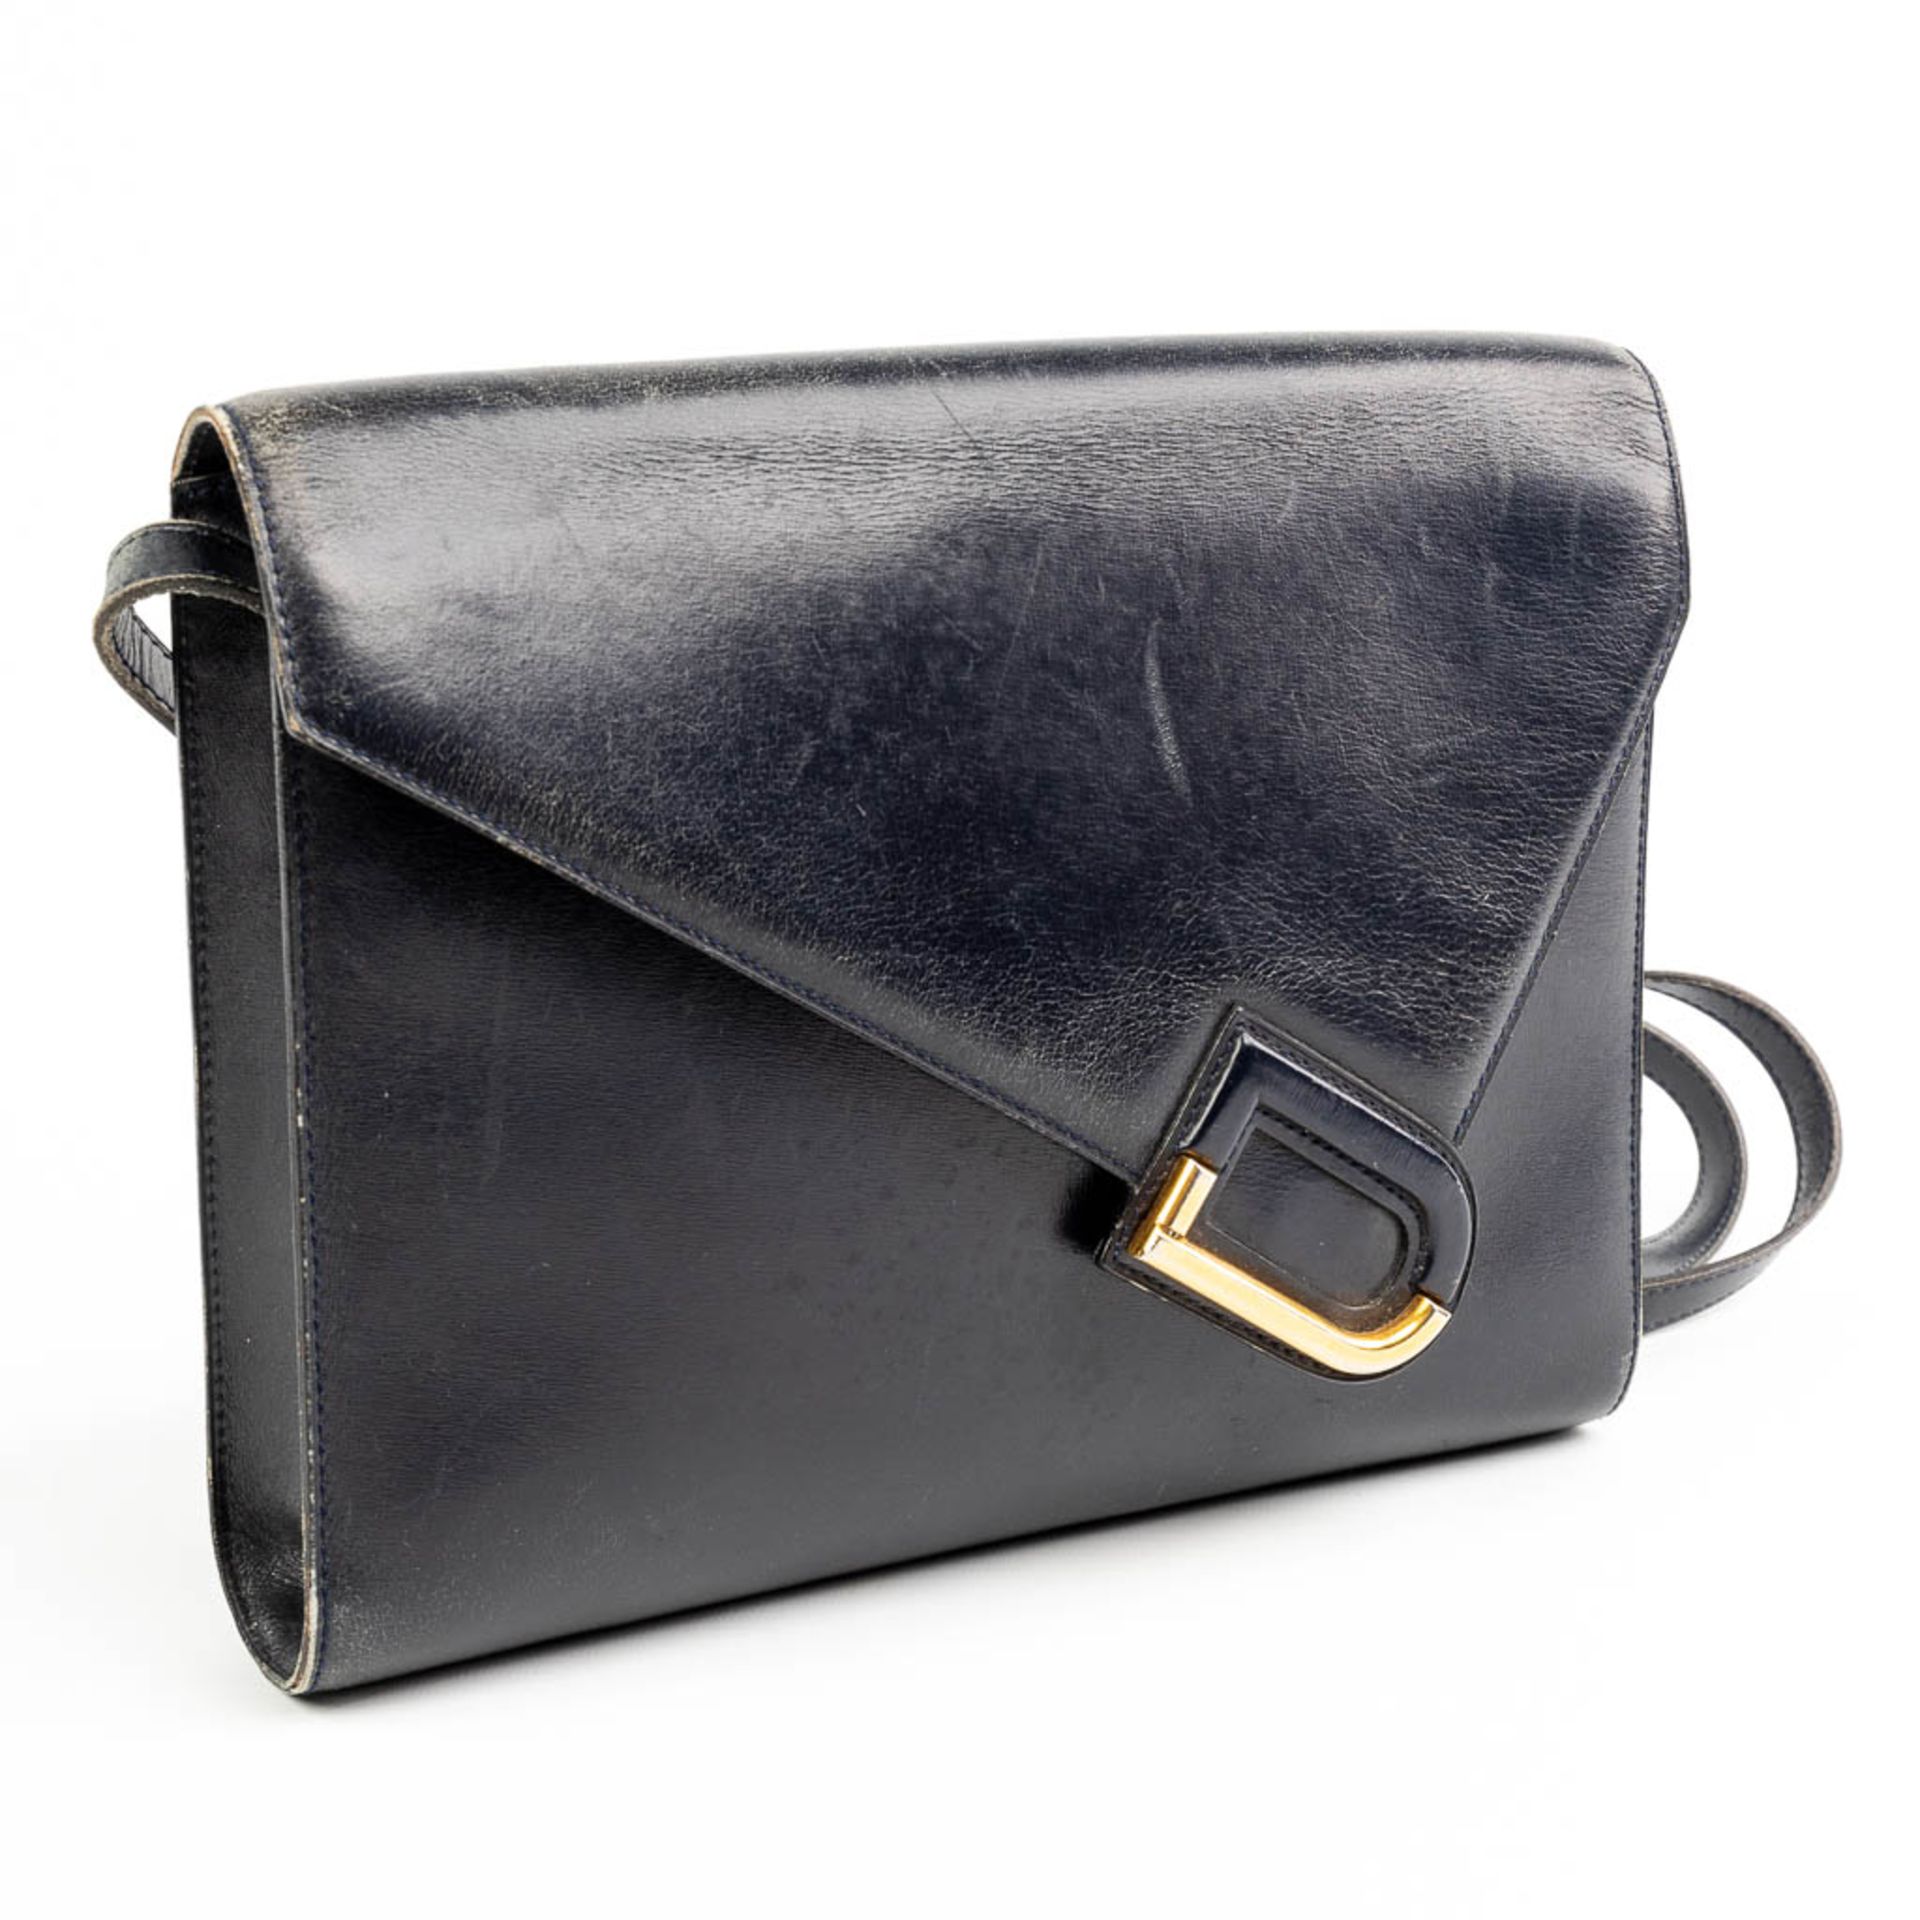 A purse made of black leather and marked Delvaux.